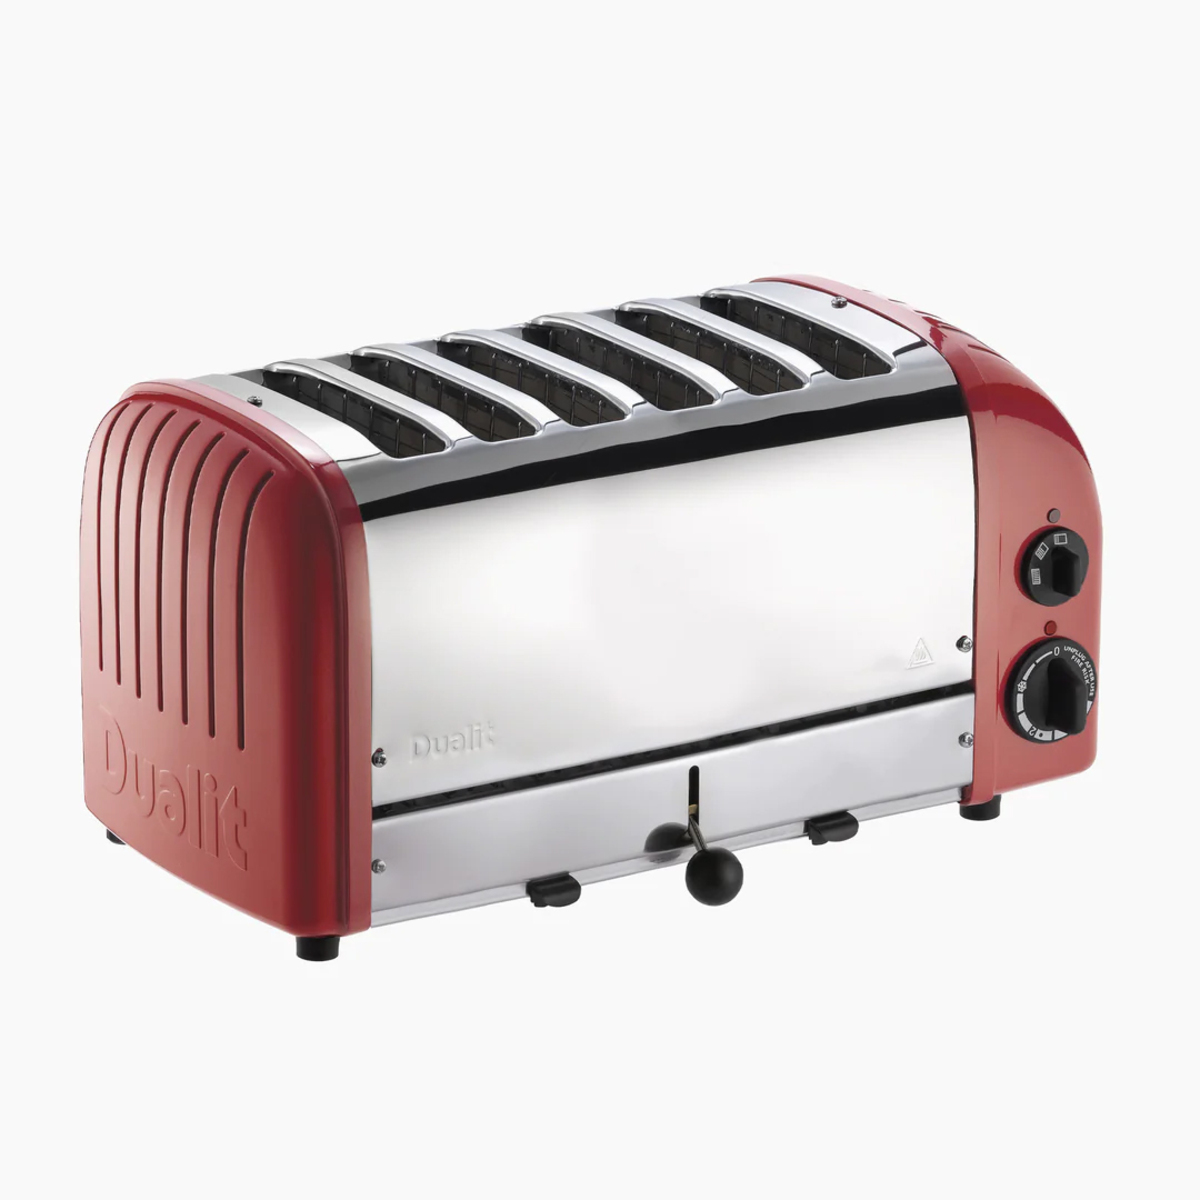 Dualit 60154 6 Slot Classic Toaster, Red